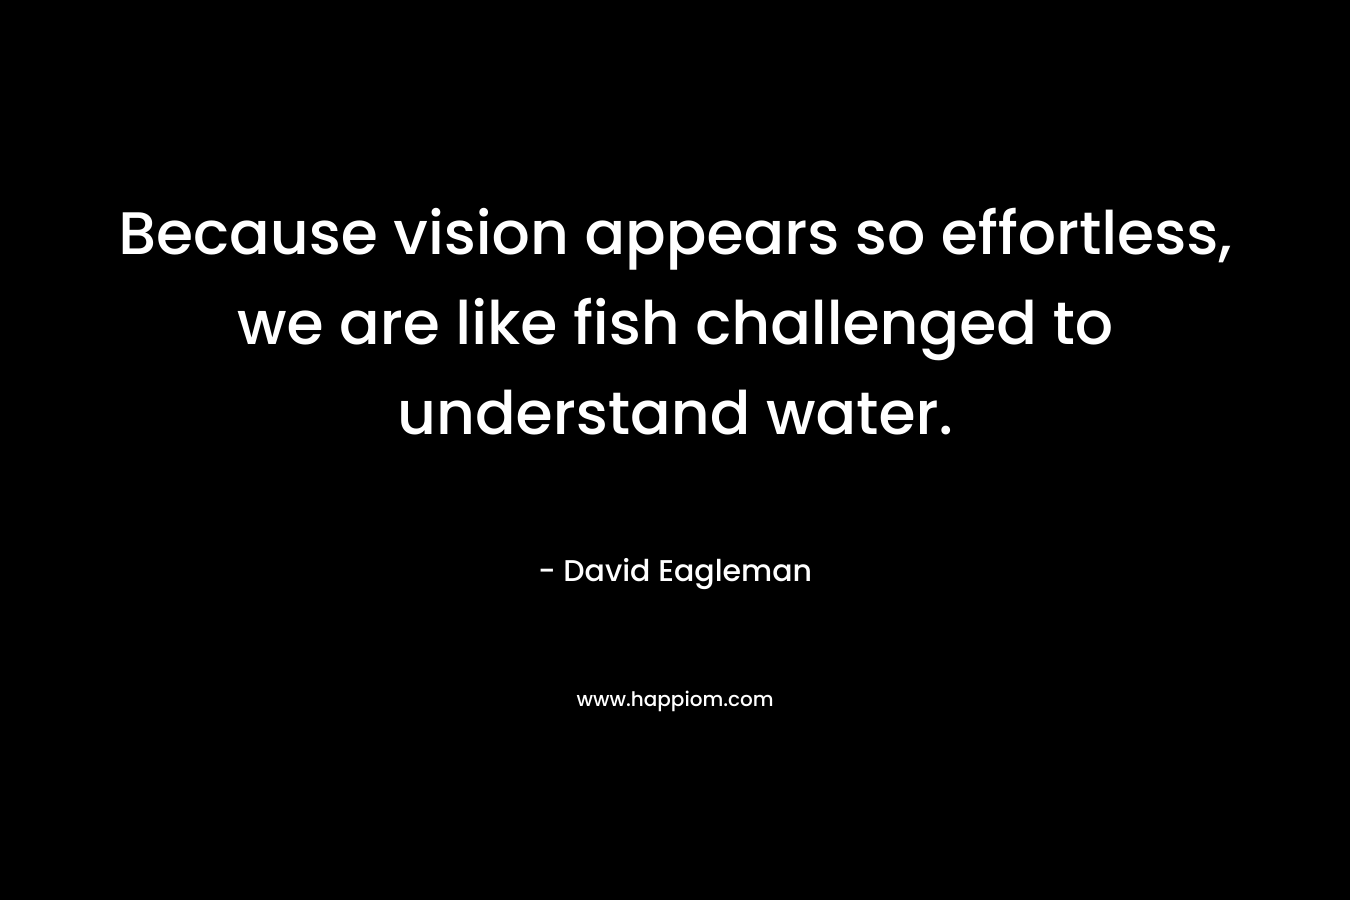 Because vision appears so effortless, we are like fish challenged to understand water. – David Eagleman